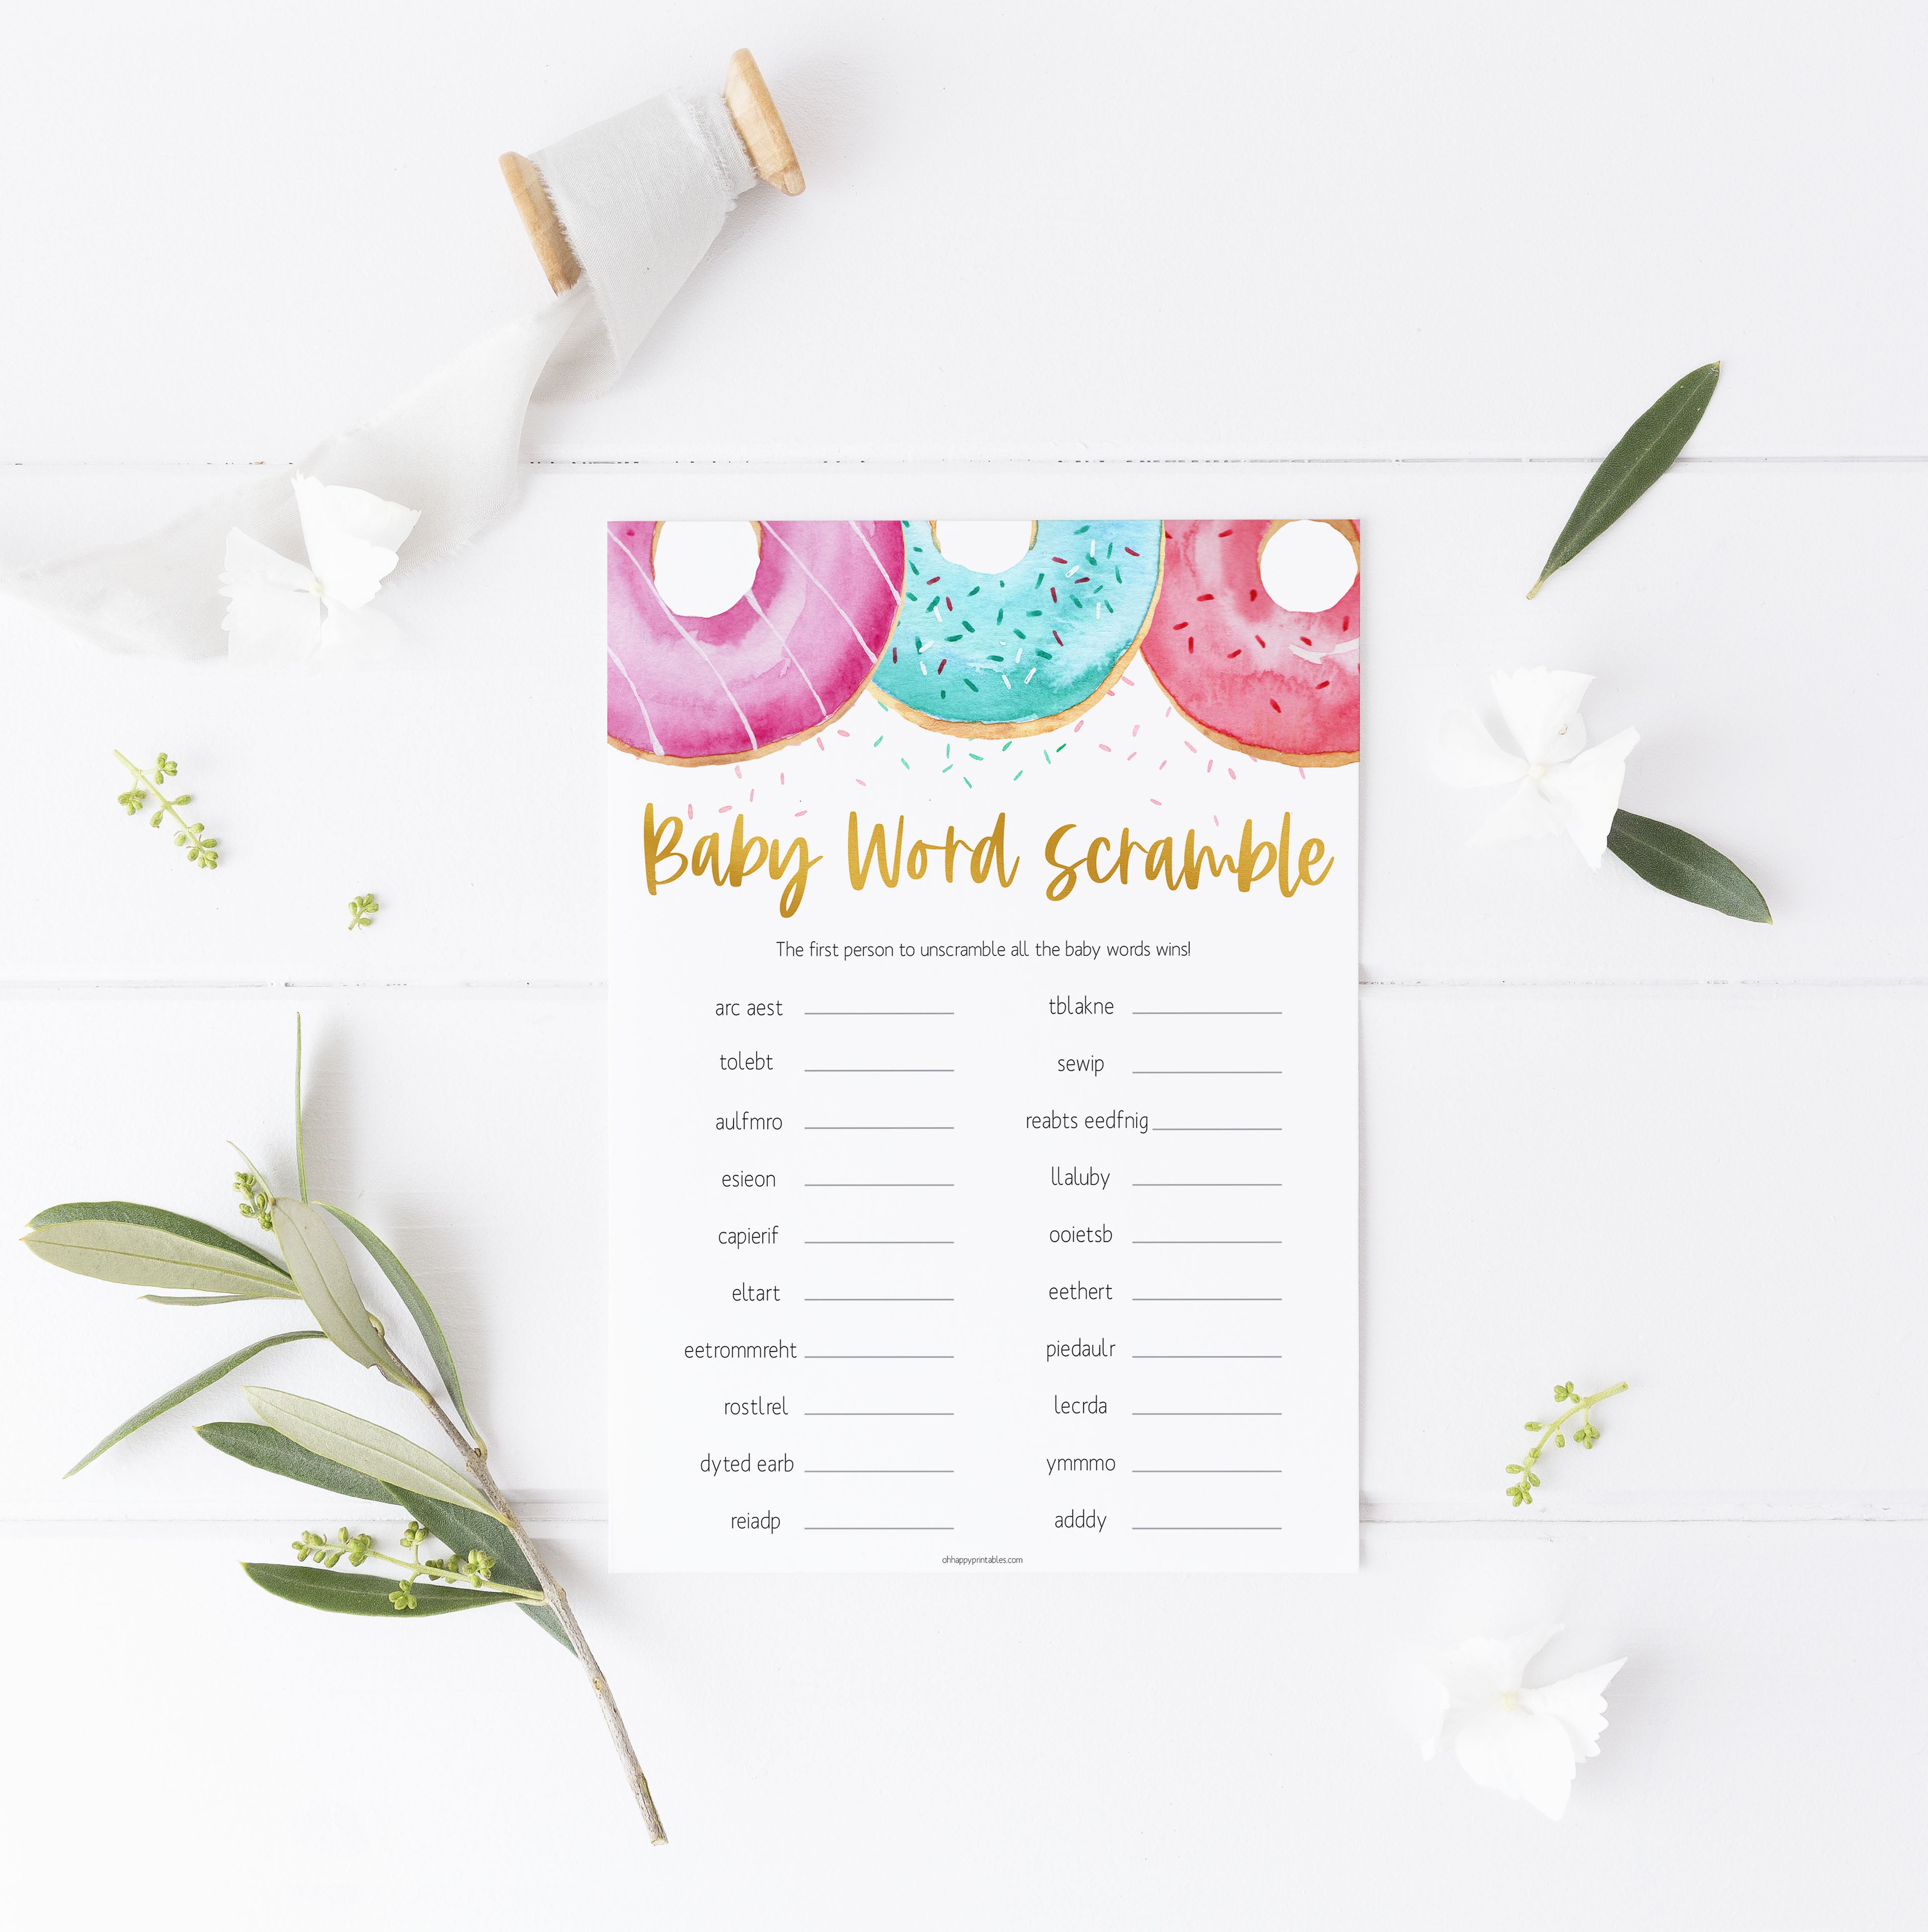 baby word scramble game, Printable baby shower games, donut baby games, baby shower games, fun baby shower ideas, top baby shower ideas, donut sprinkles baby shower, baby shower games, fun donut baby shower ideas